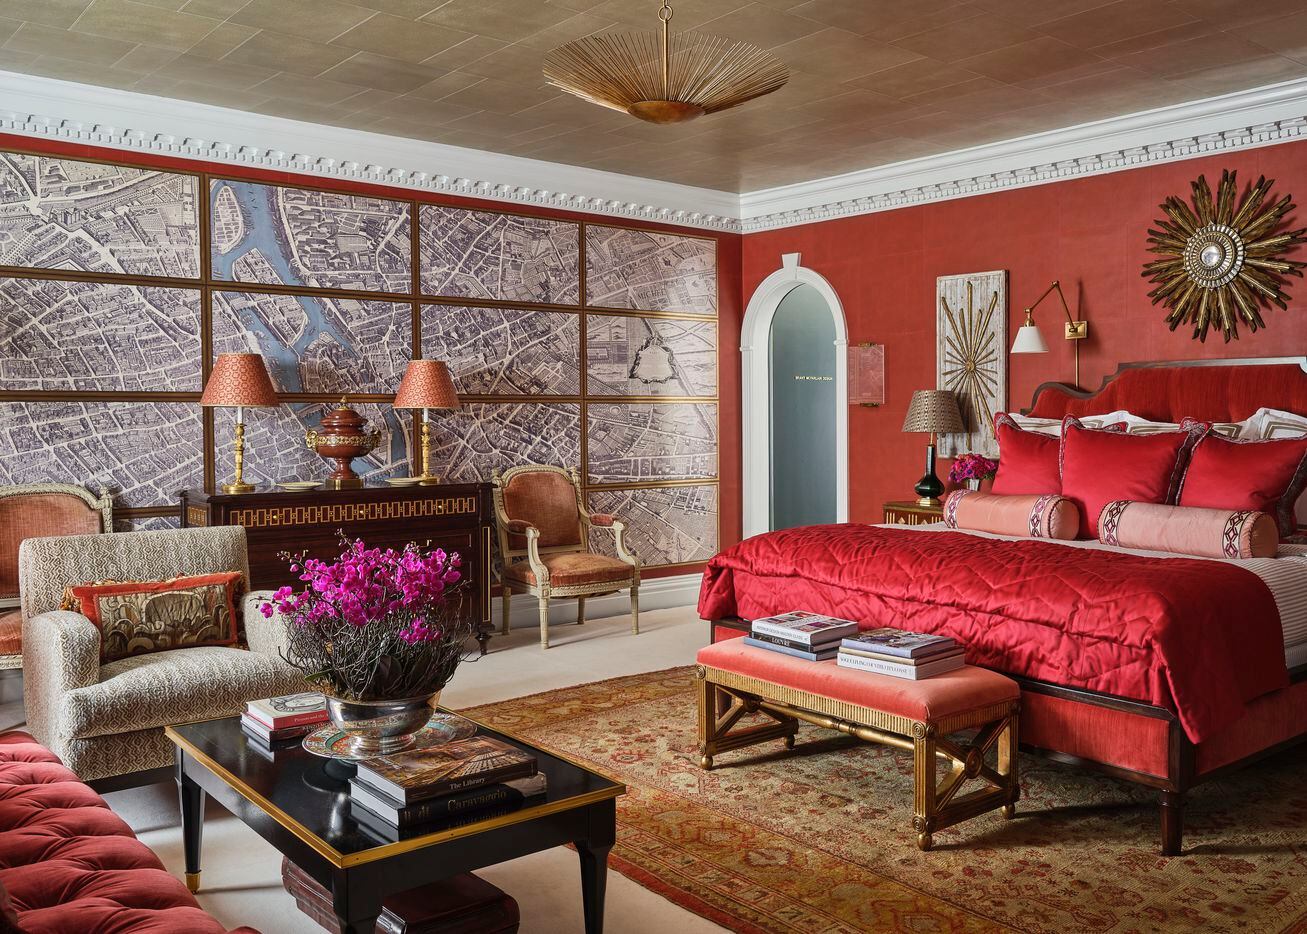 Alexa Hampton for Mark Hampton LLC designed the upstairs primary bedroom at the 2021 Kips Bay Decorator Show House Dallas. The room is full of bright, powerful red tones and artful details like built-in bookcases and plaster moldings.